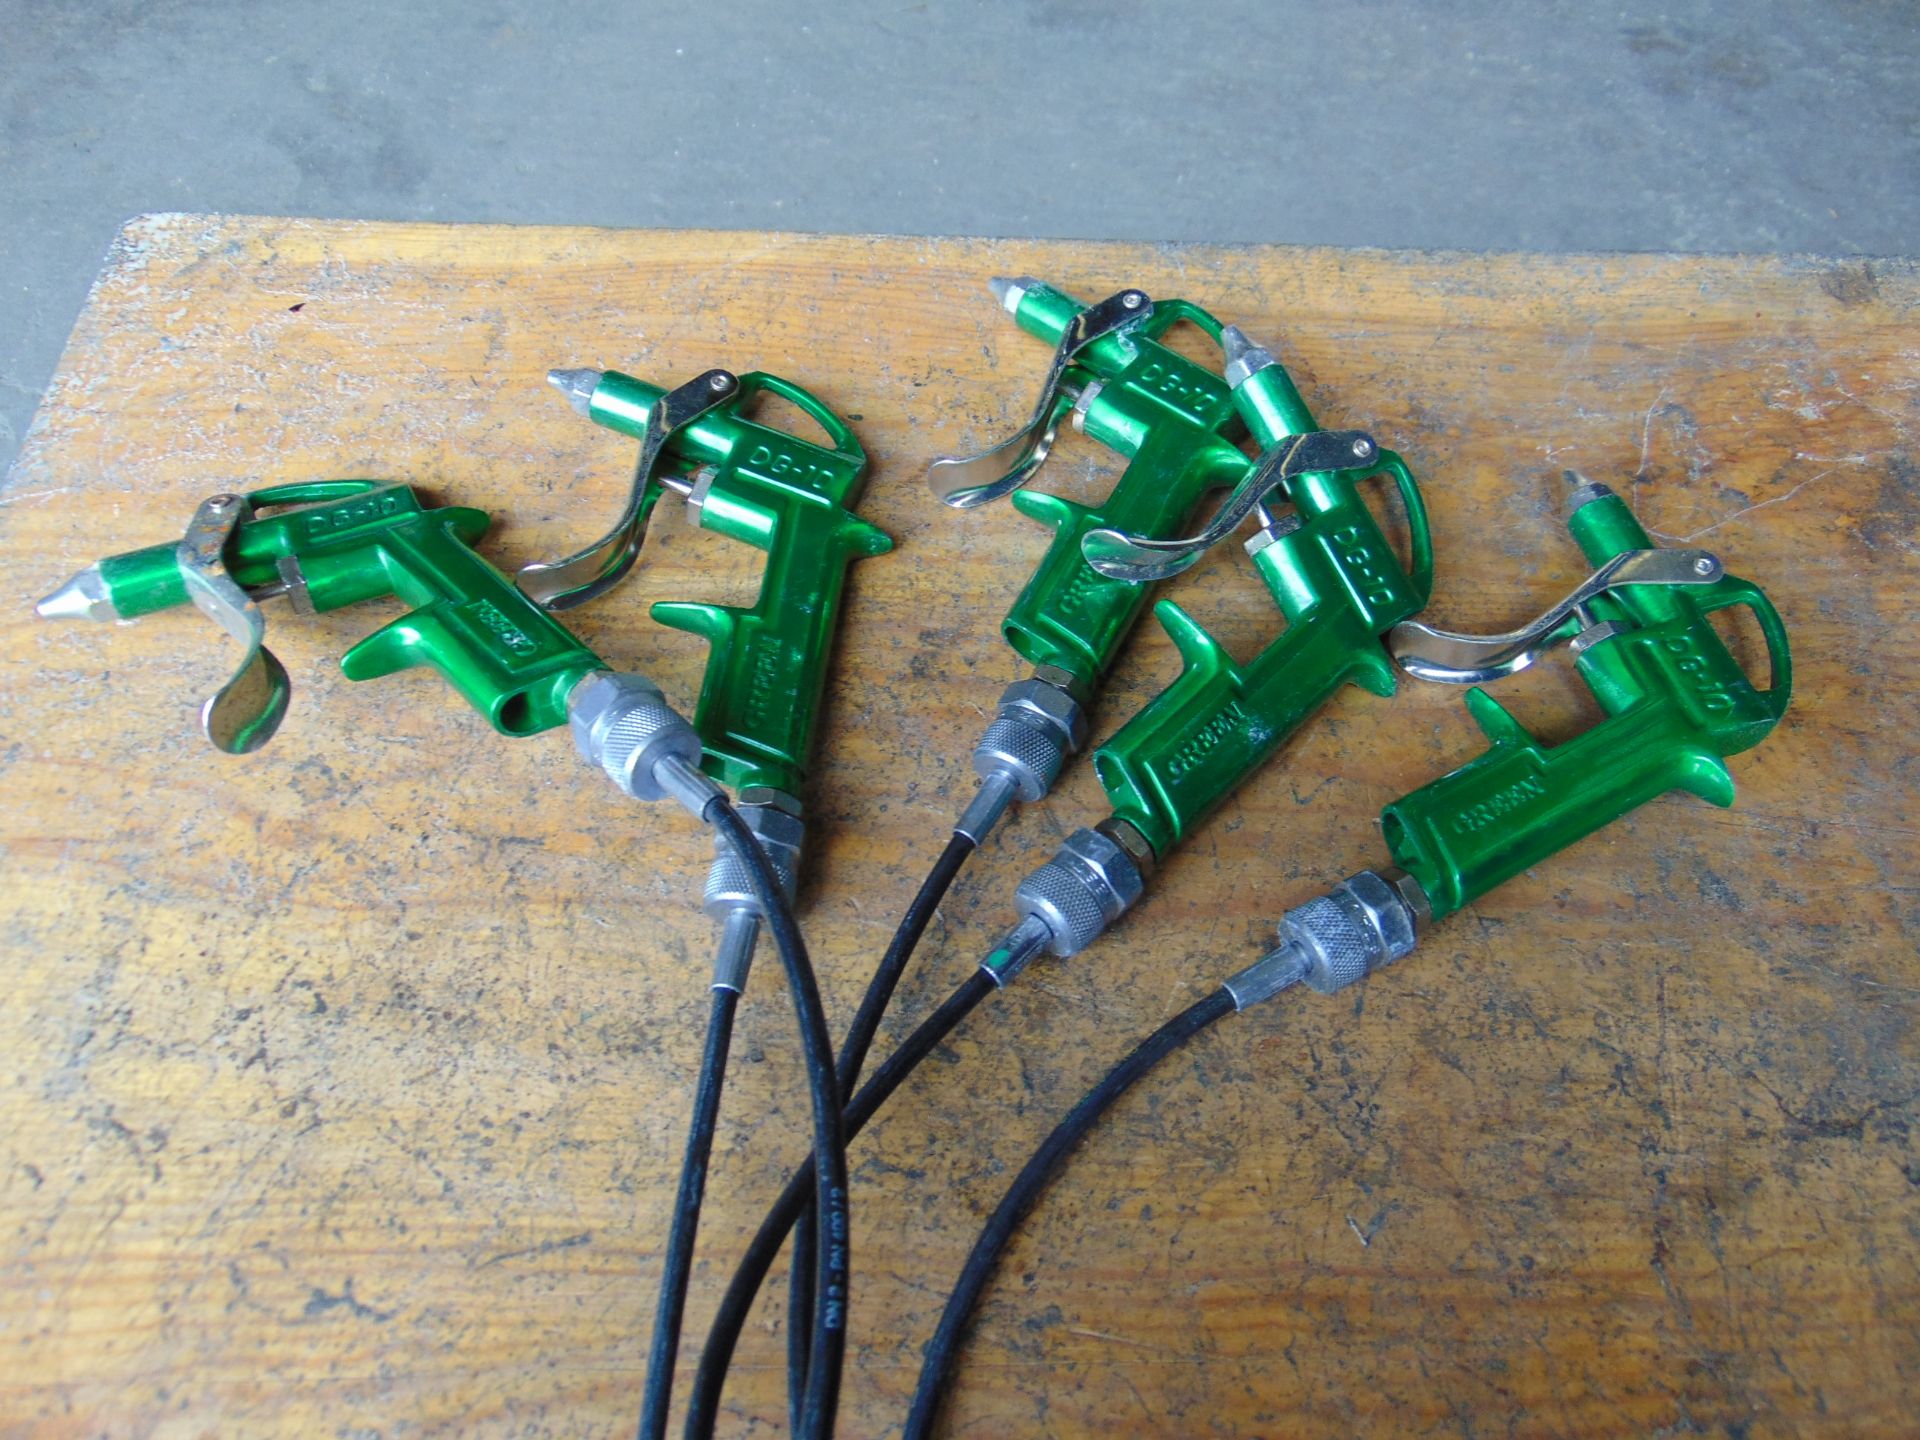 5 x Green DG-10 Air Dusters - Image 2 of 5